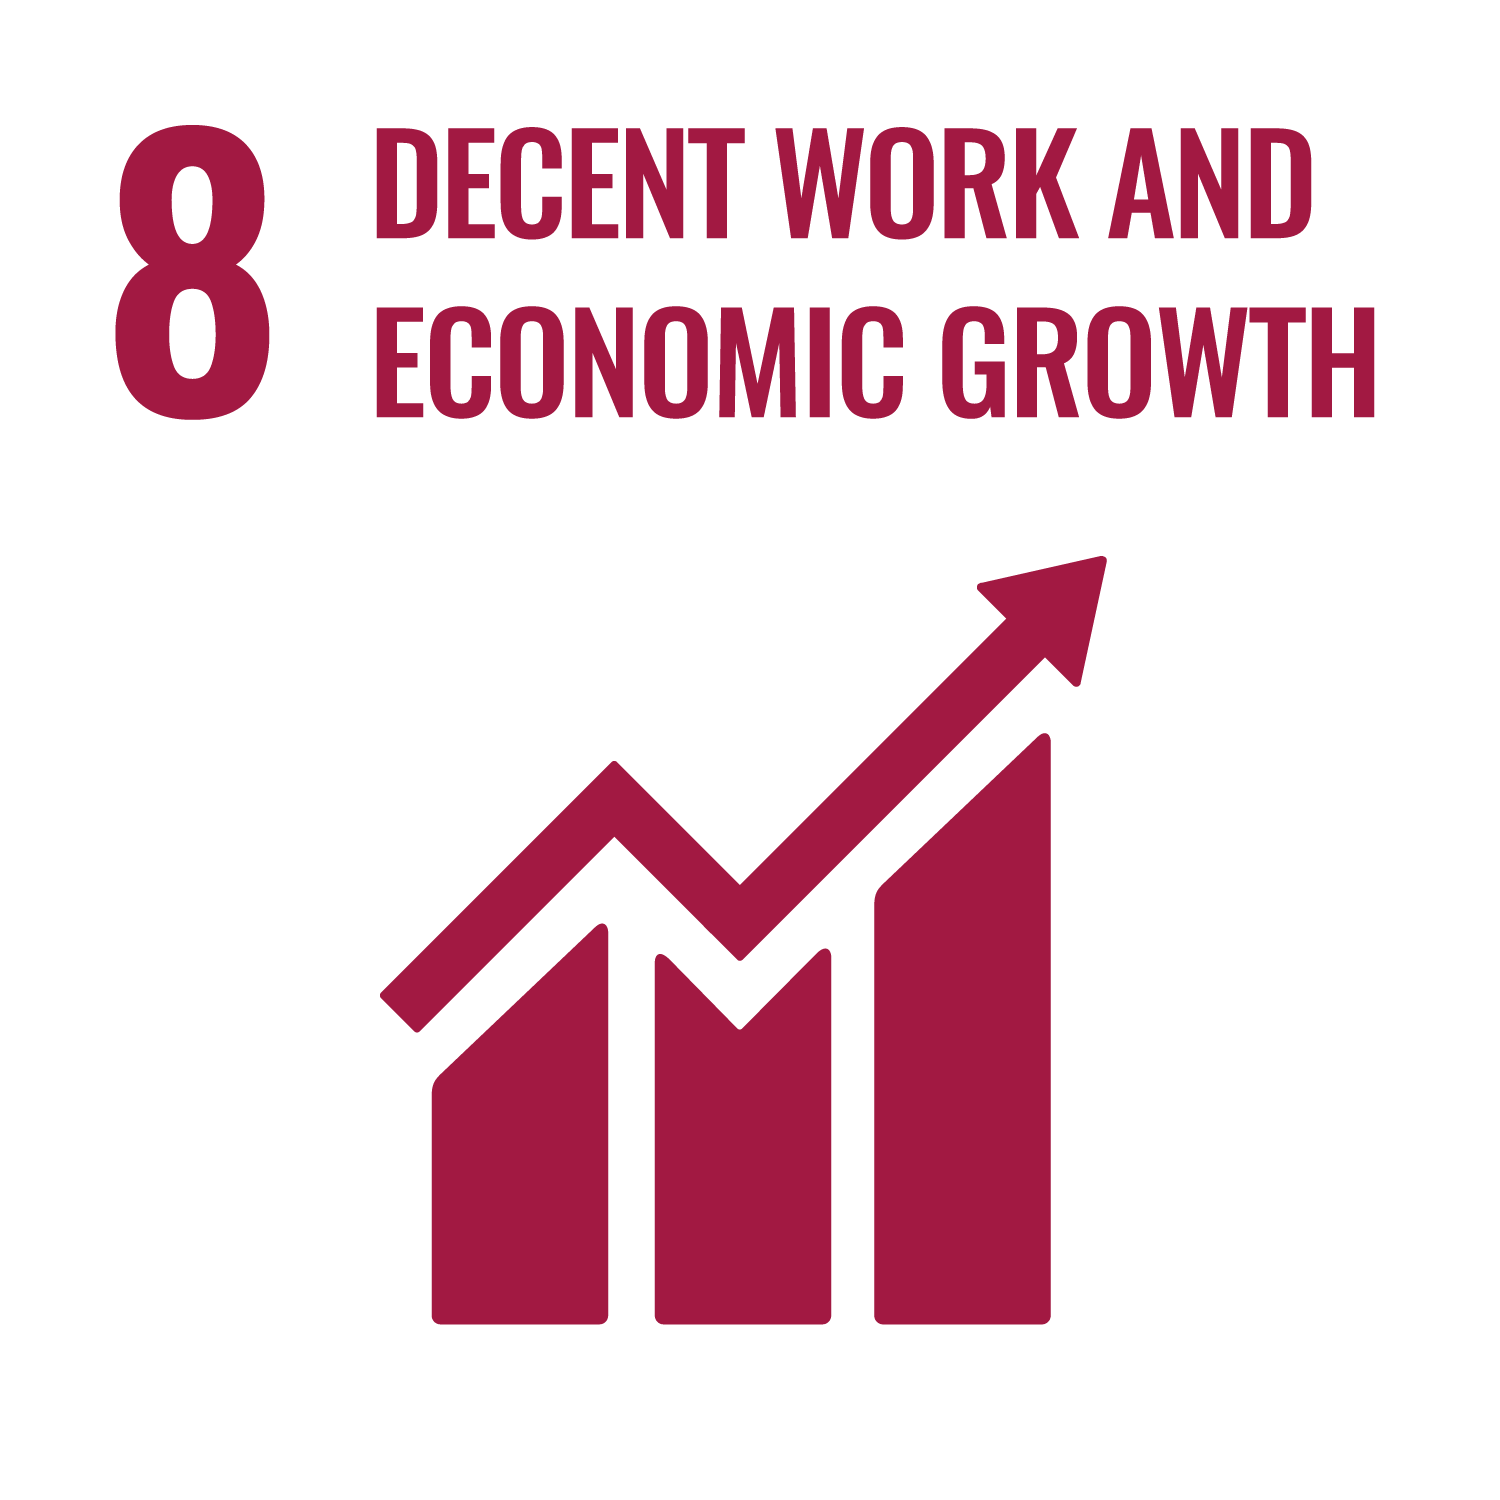 8. Decent Work and Economic Growth